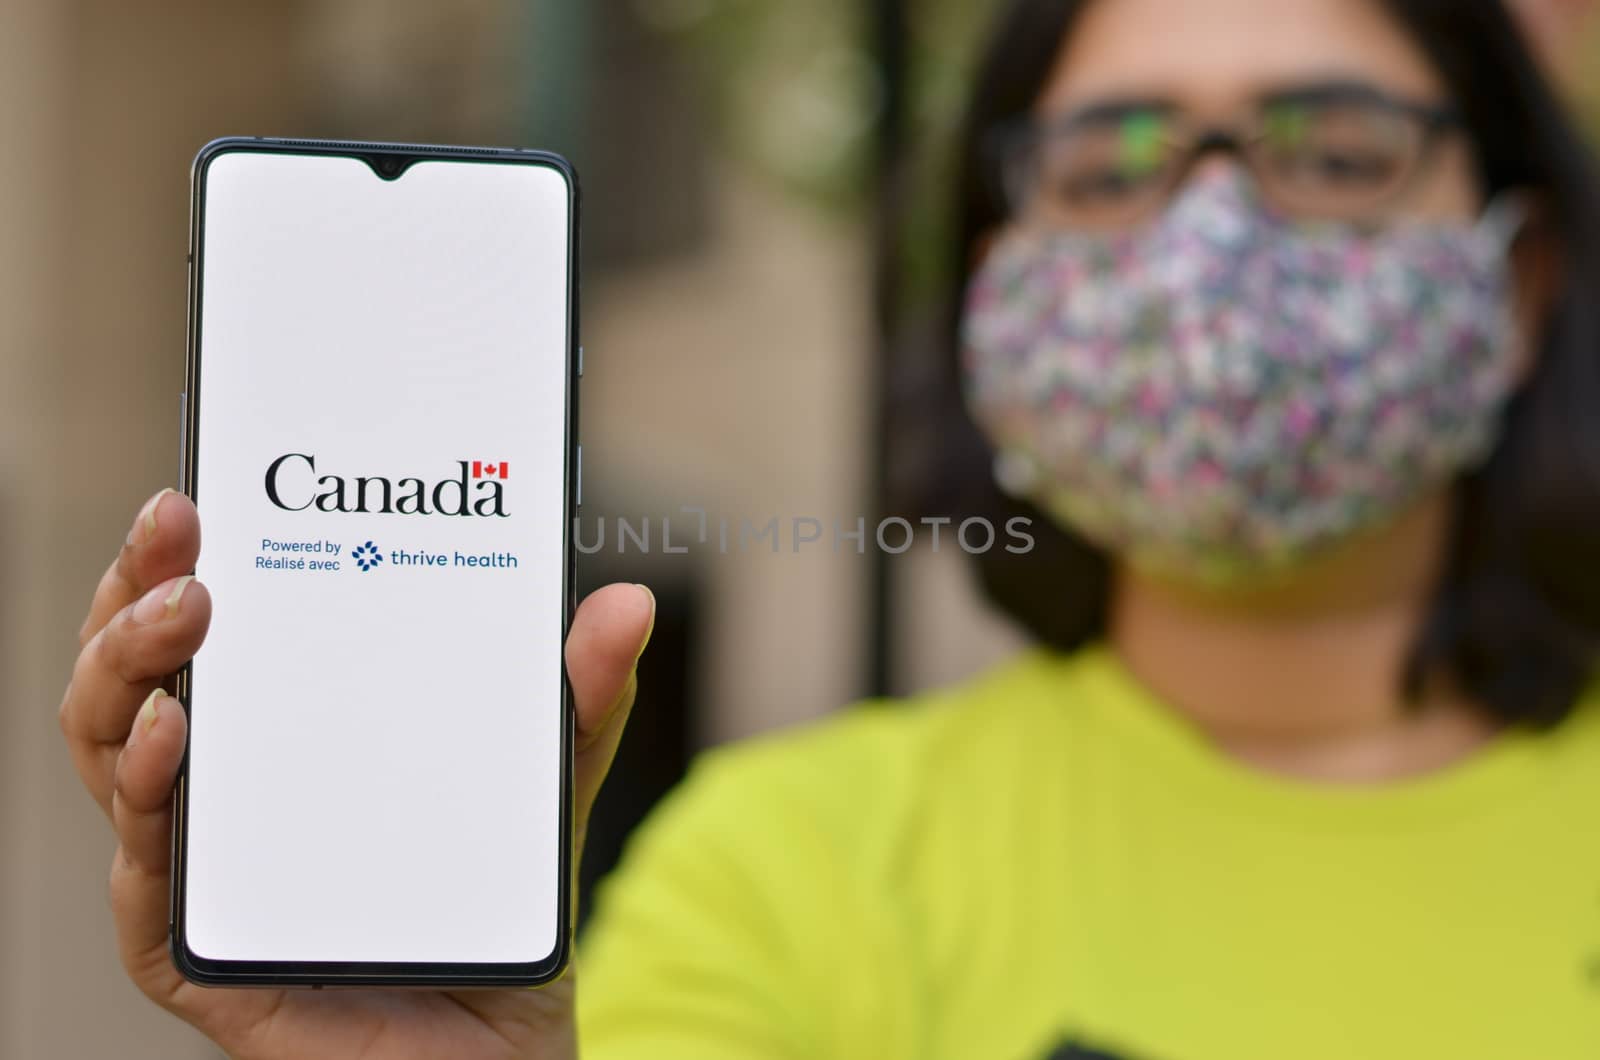 Toronto, Ontario,Canada, 2020. Girl wearing face mask showing Covid-19 app on mobile phone. Health Canada in partnership with Thrive Health has created the Canada COVID-19 app for controlling pandemic